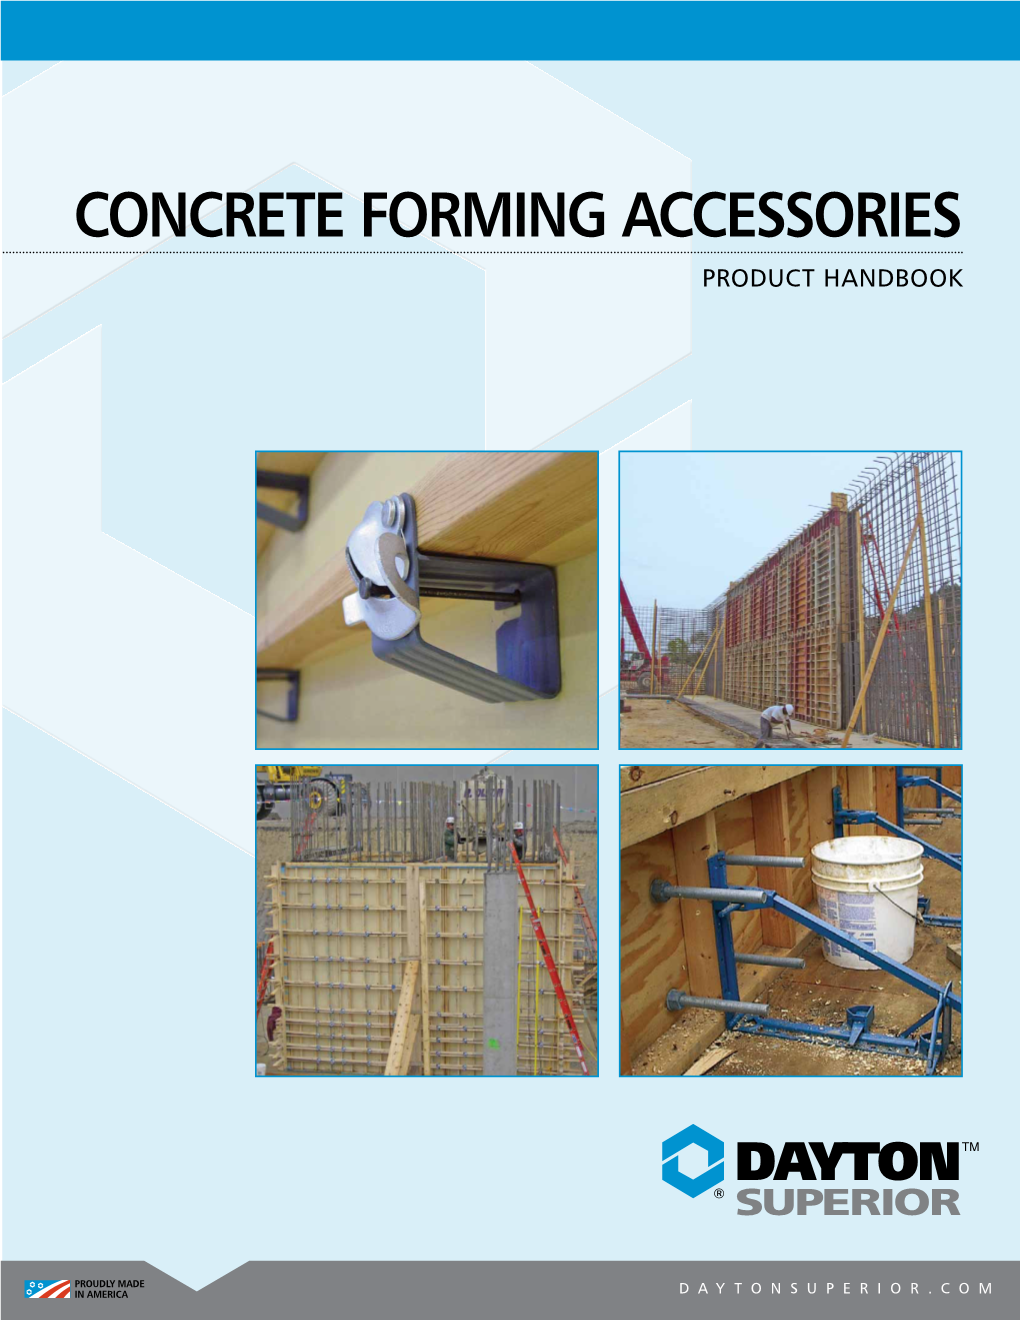 Concrete Forming Accessories PRODUCT HANDBOOK